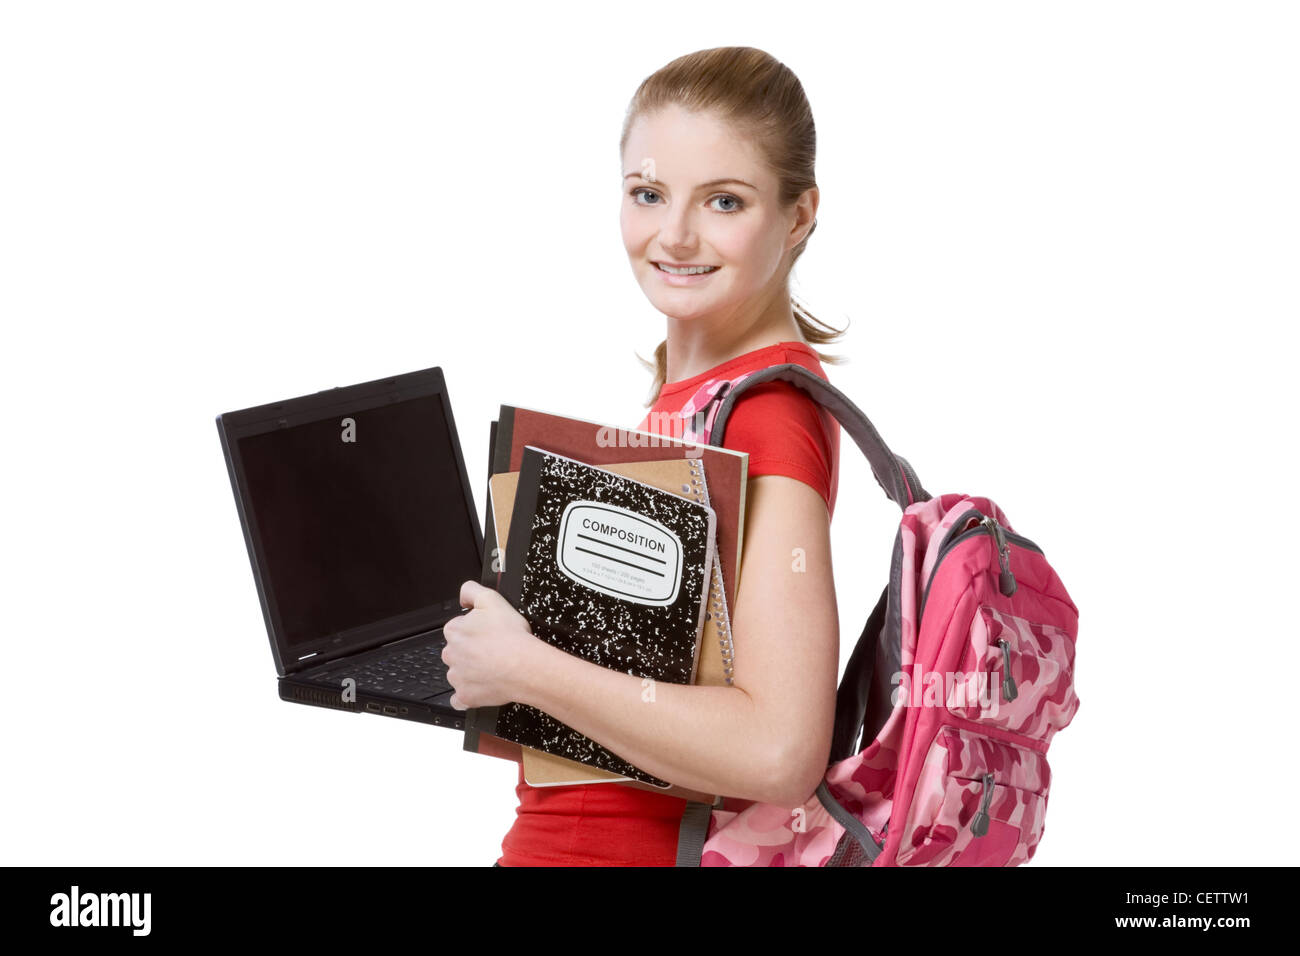 friendly Caucasian High school student schoolgirl with backpack, holding laptop computer, notebooks and composition book Stock Photo